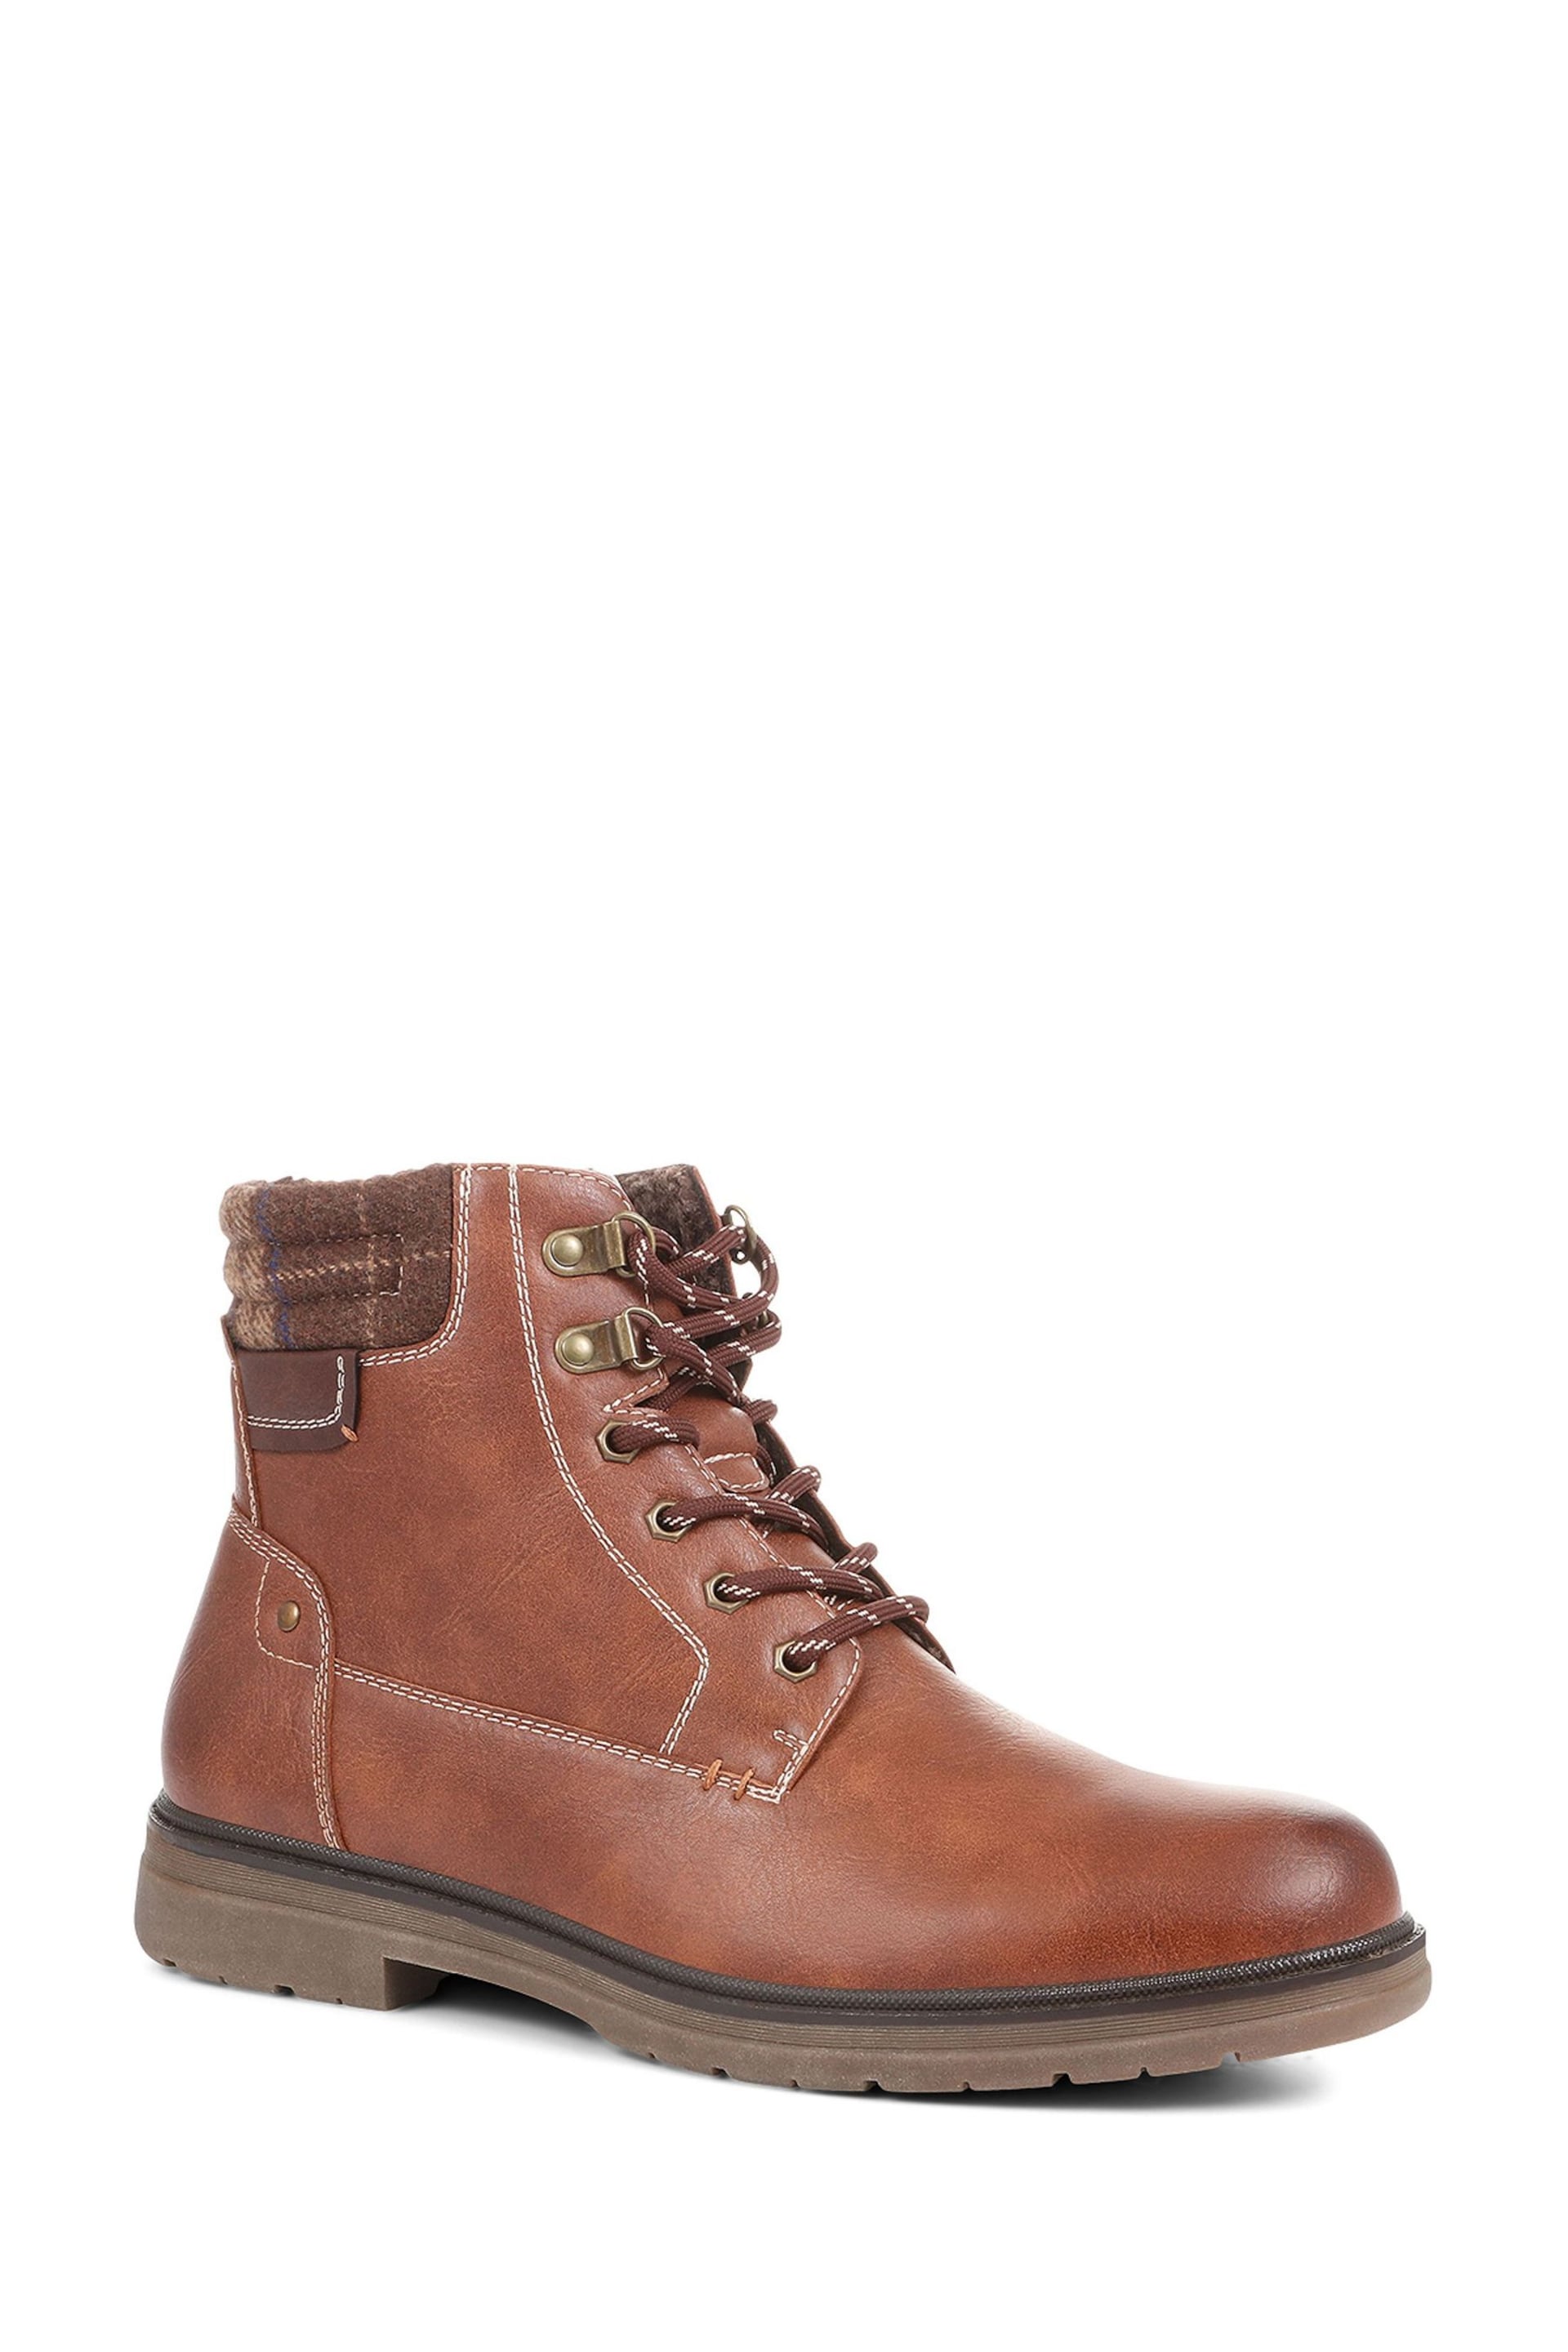 Pavers Natural Wide Fit Hiker Ankle Boots - Image 2 of 5